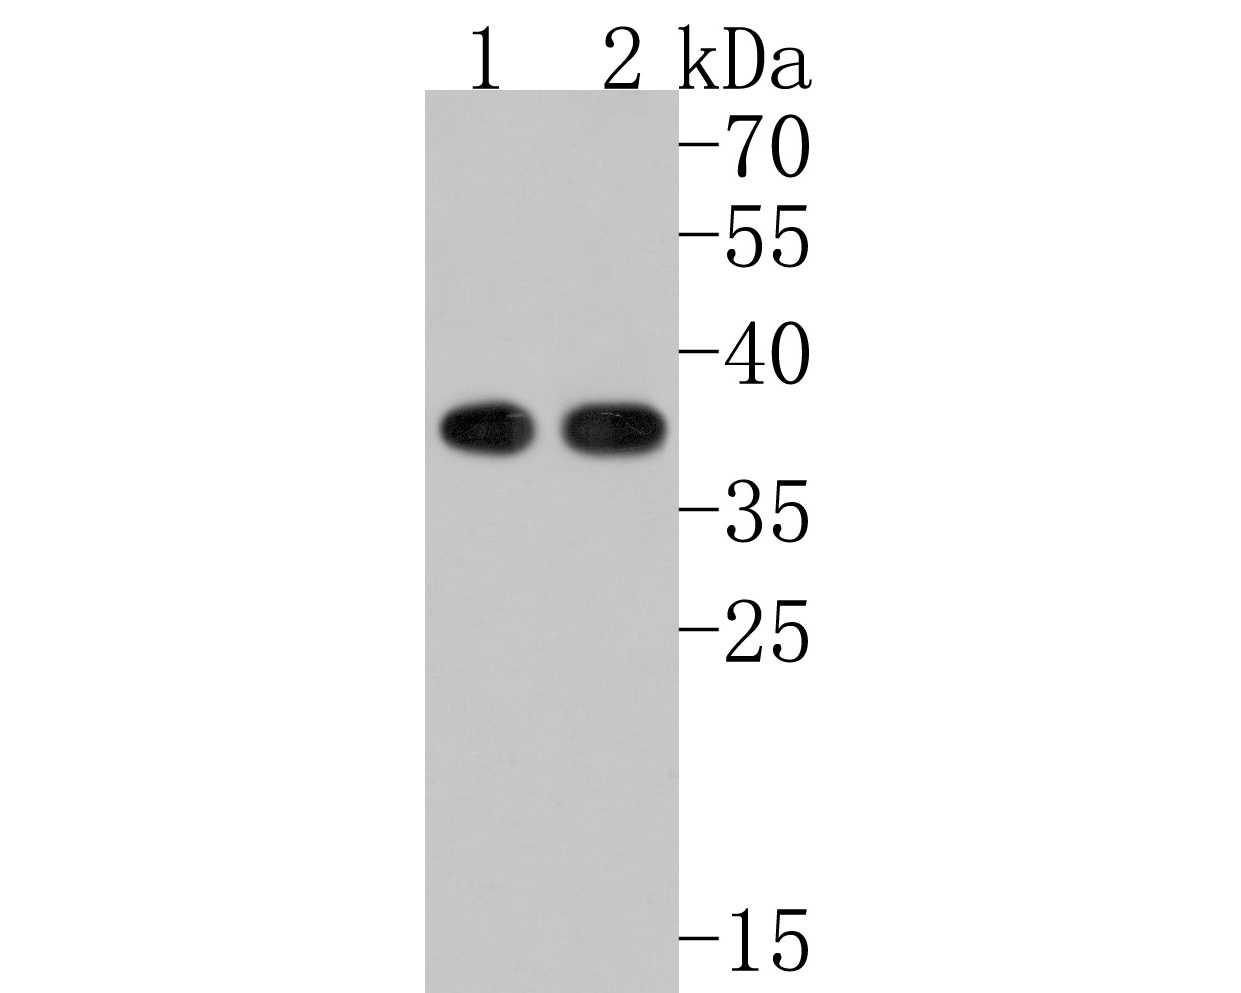 Western blot analysis of PHF11 on different lysates. Proteins were transferred to a PVDF membrane and blocked with 5% NFDM/TBST for 1 hour at room temperature. The primary antibody (HA500478, 1/5,000) was used in 5% NFDM/TBST at room temperature for 2 hours. Goat Anti-Rabbit IgG - HRP Secondary Antibody (HA1001) at 1:200,000 dilution was used for 1 hour at room temperature.<br />
Positive control: <br />
Lane 1: Raji cell lysate<br />
Lane 2: Jurkat cell lysate